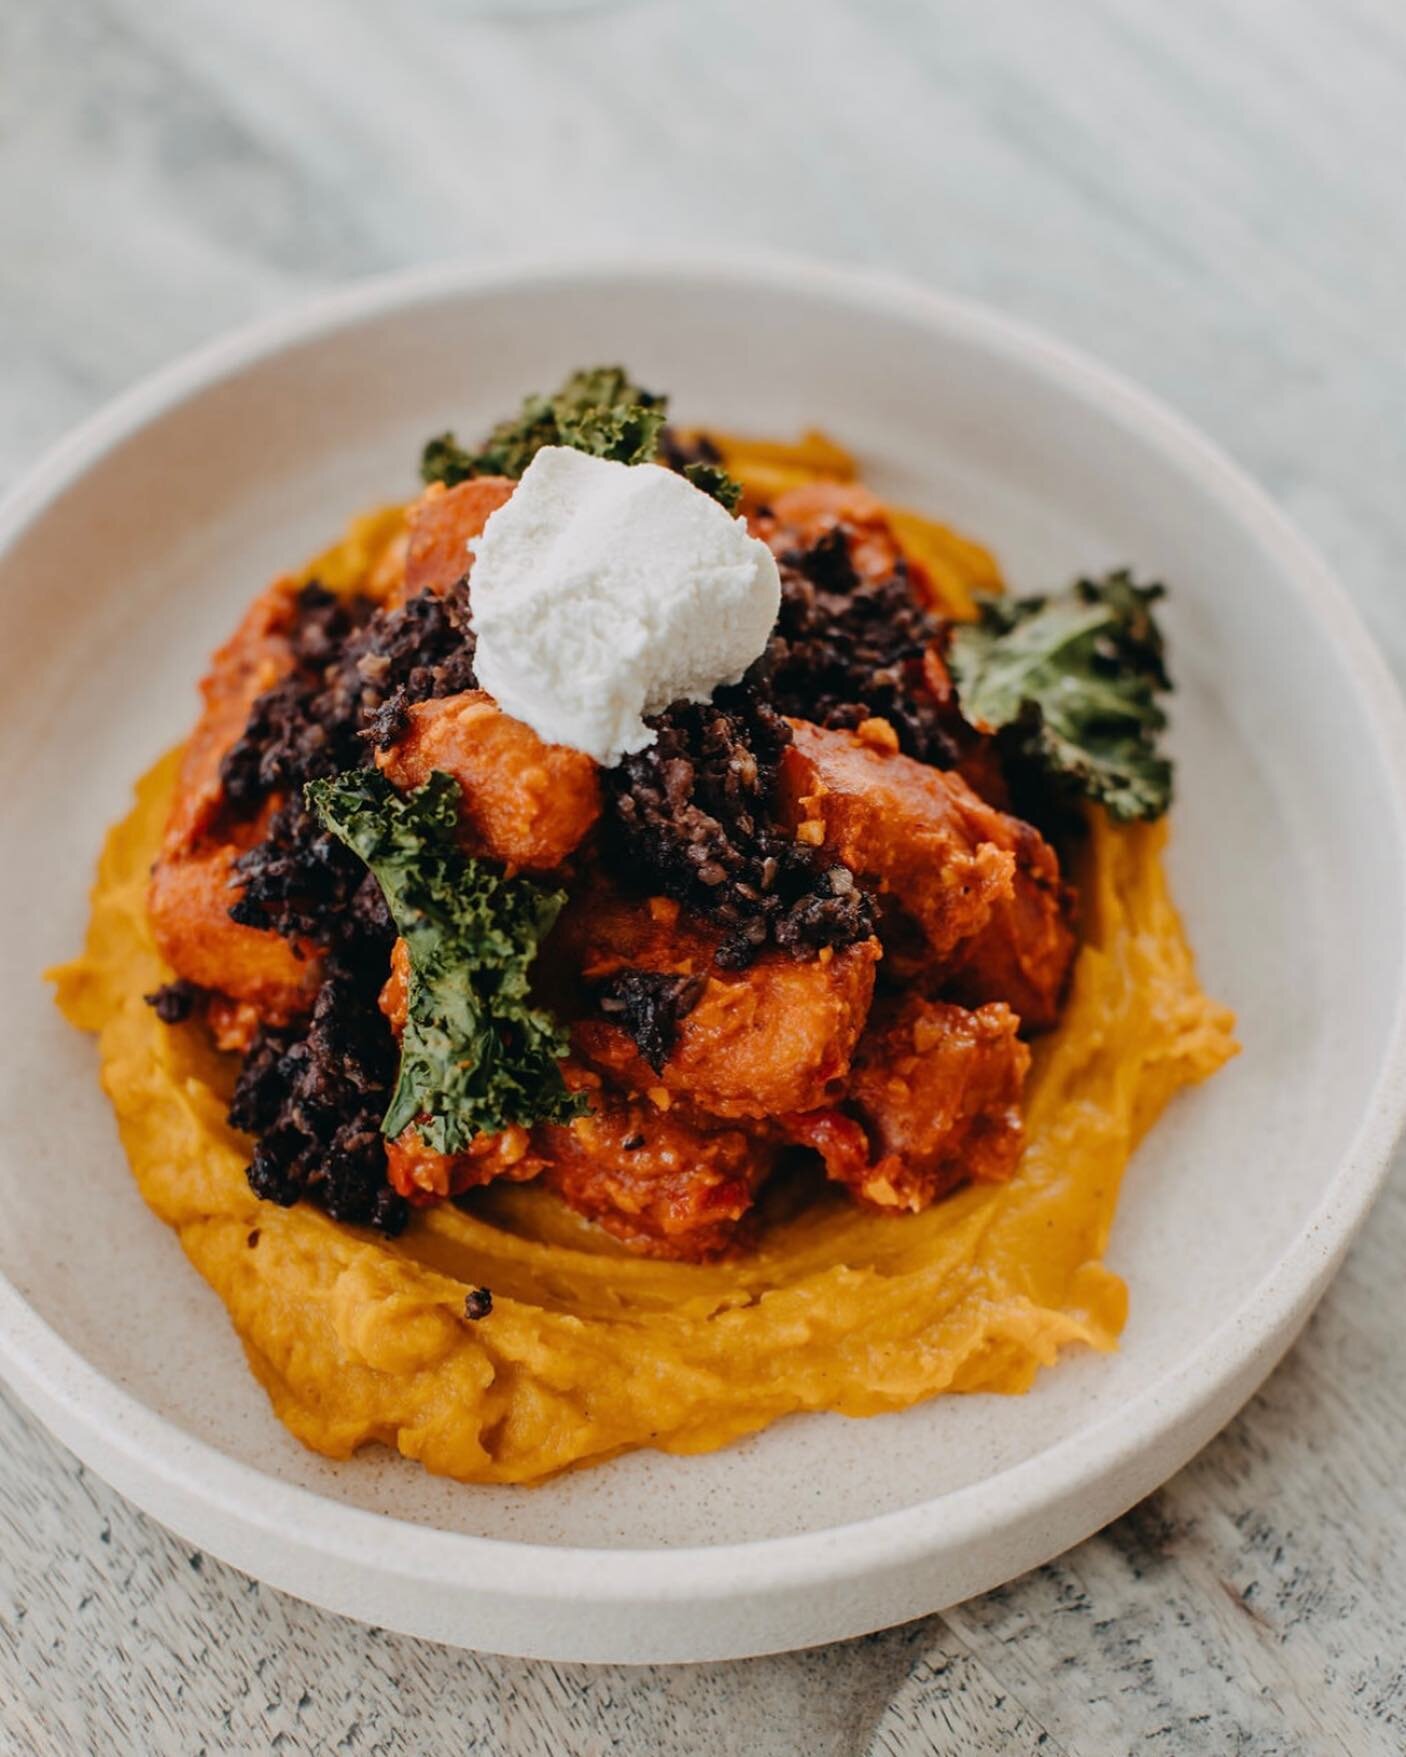 We&rsquo;ve stepped our classic Breakfast Gnocchi up a notch. ✨ The crispy gnocchi is served with creamy pumpkin puree, a traditionally rustic romesco, and the addition of richly decadent morcilla sausage.